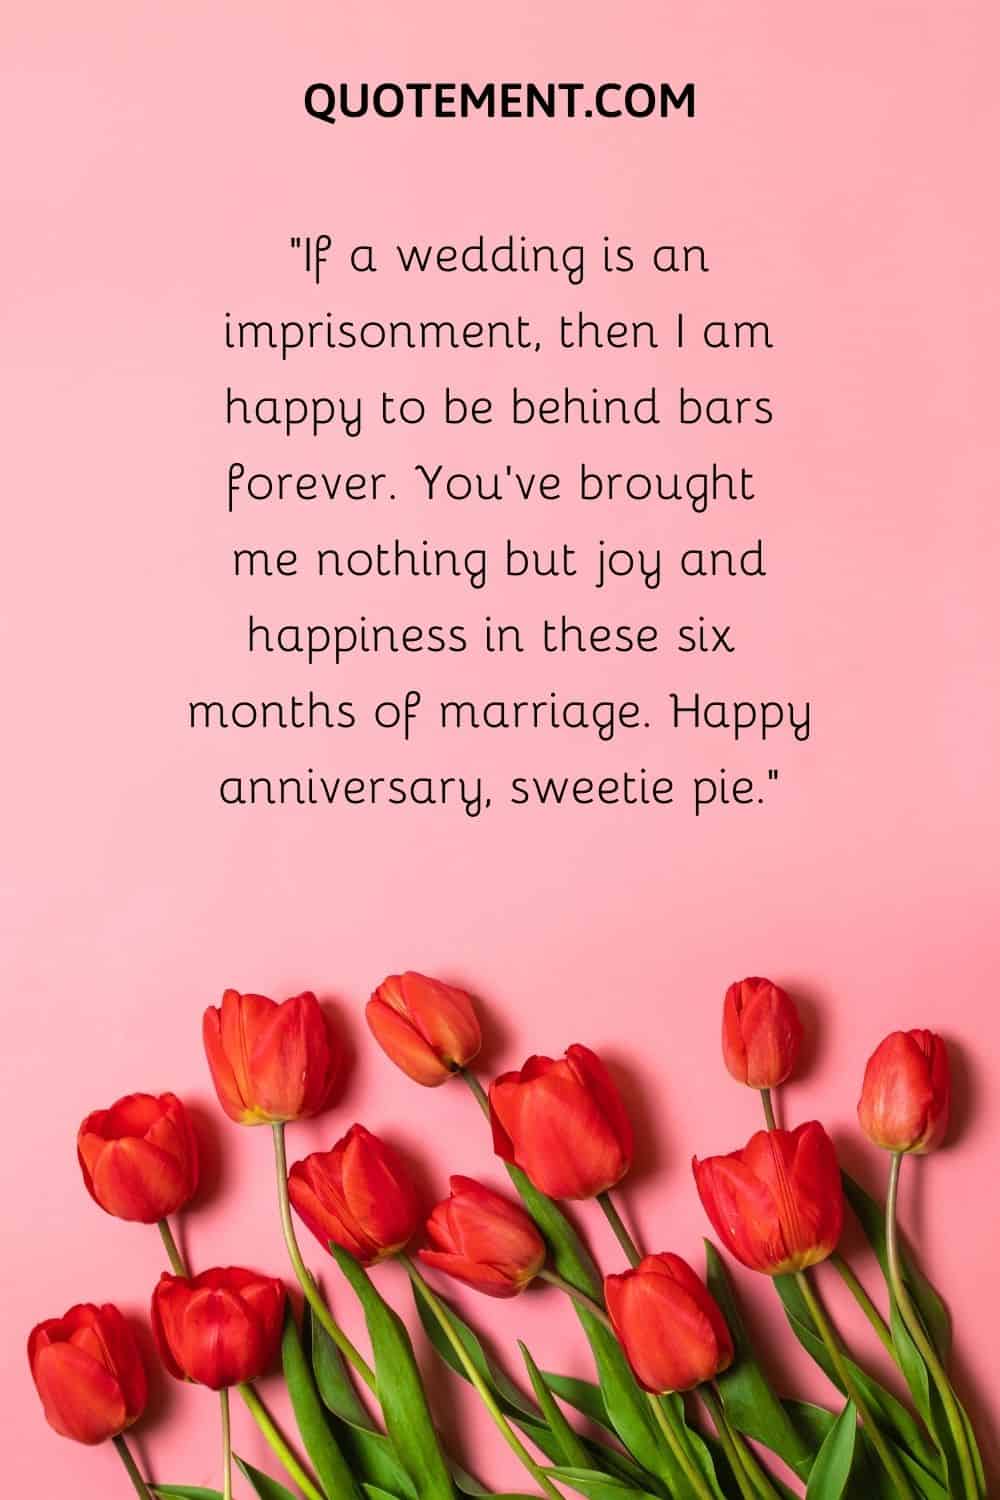 If a wedding is an imprisonment, then I am happy to be behind bars forever.